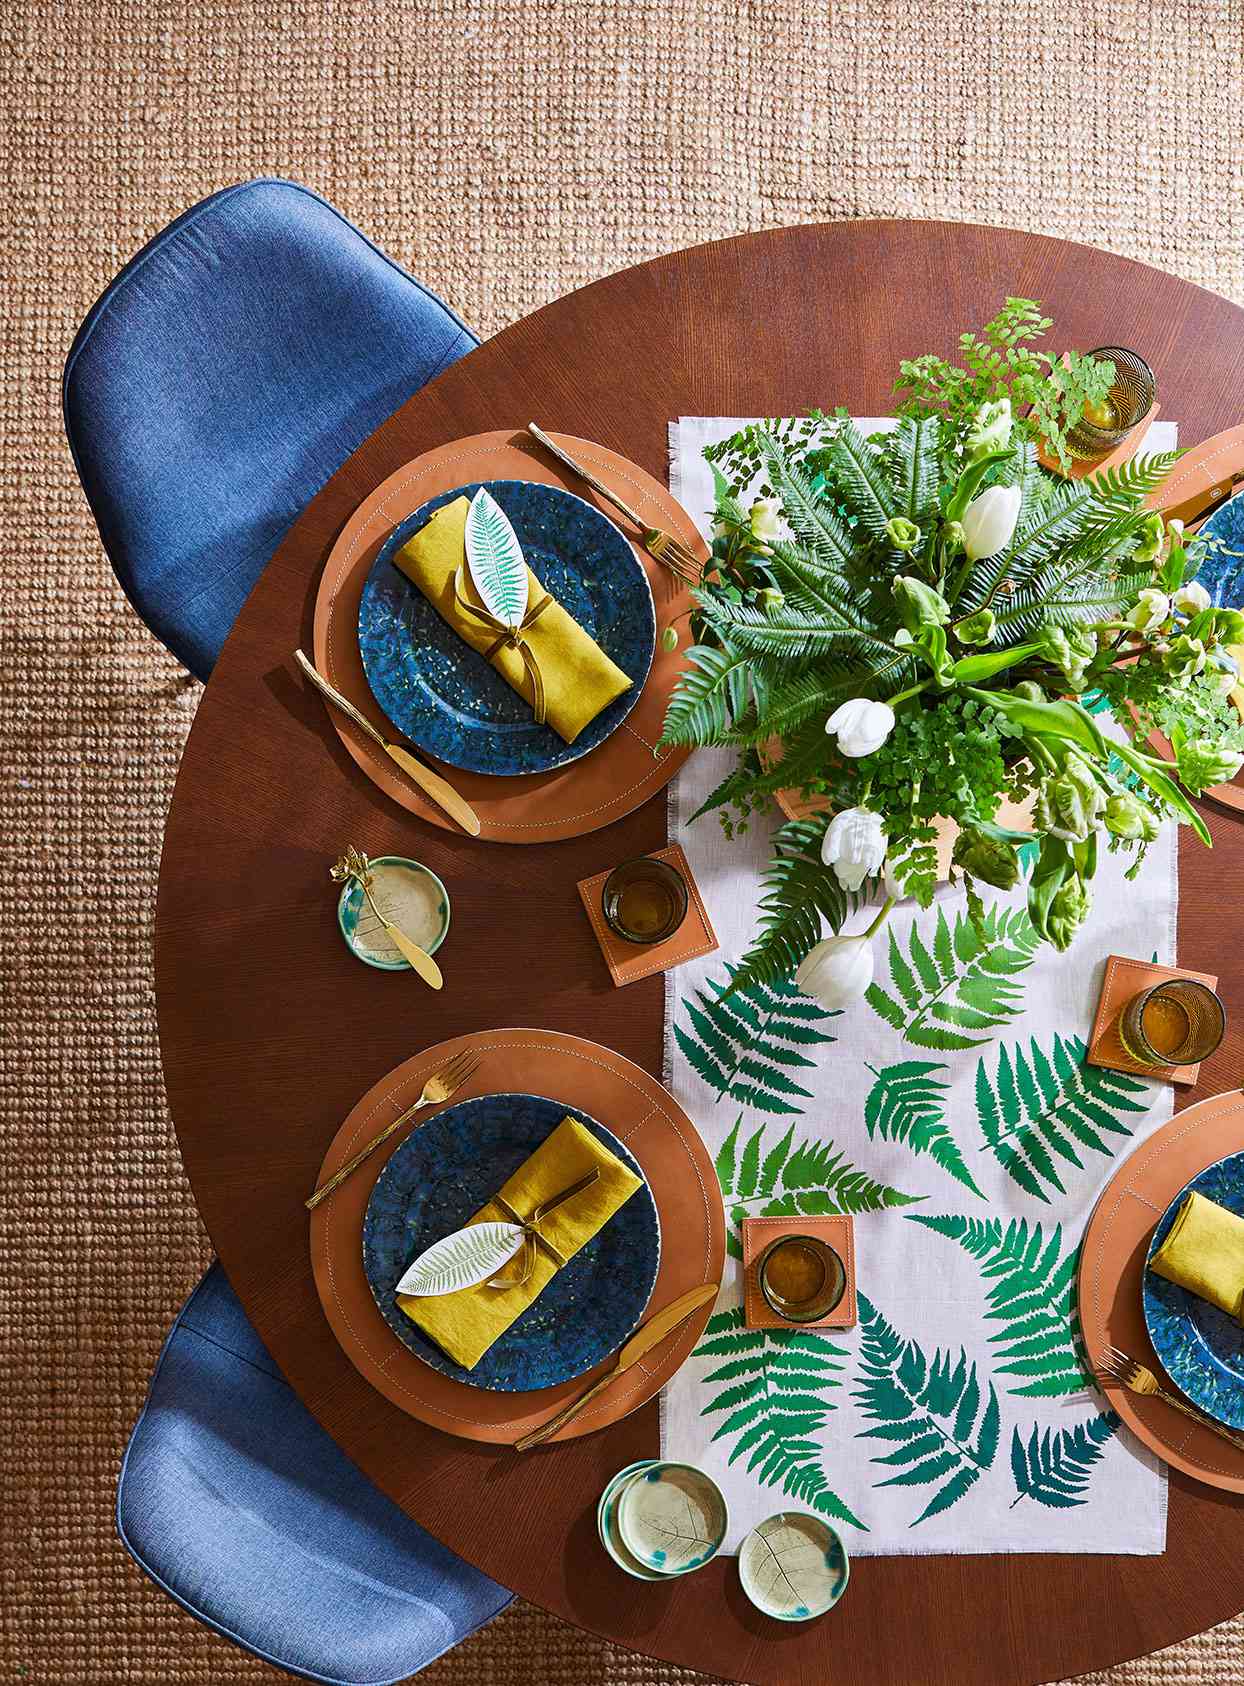 round wooden table with greenery place settings